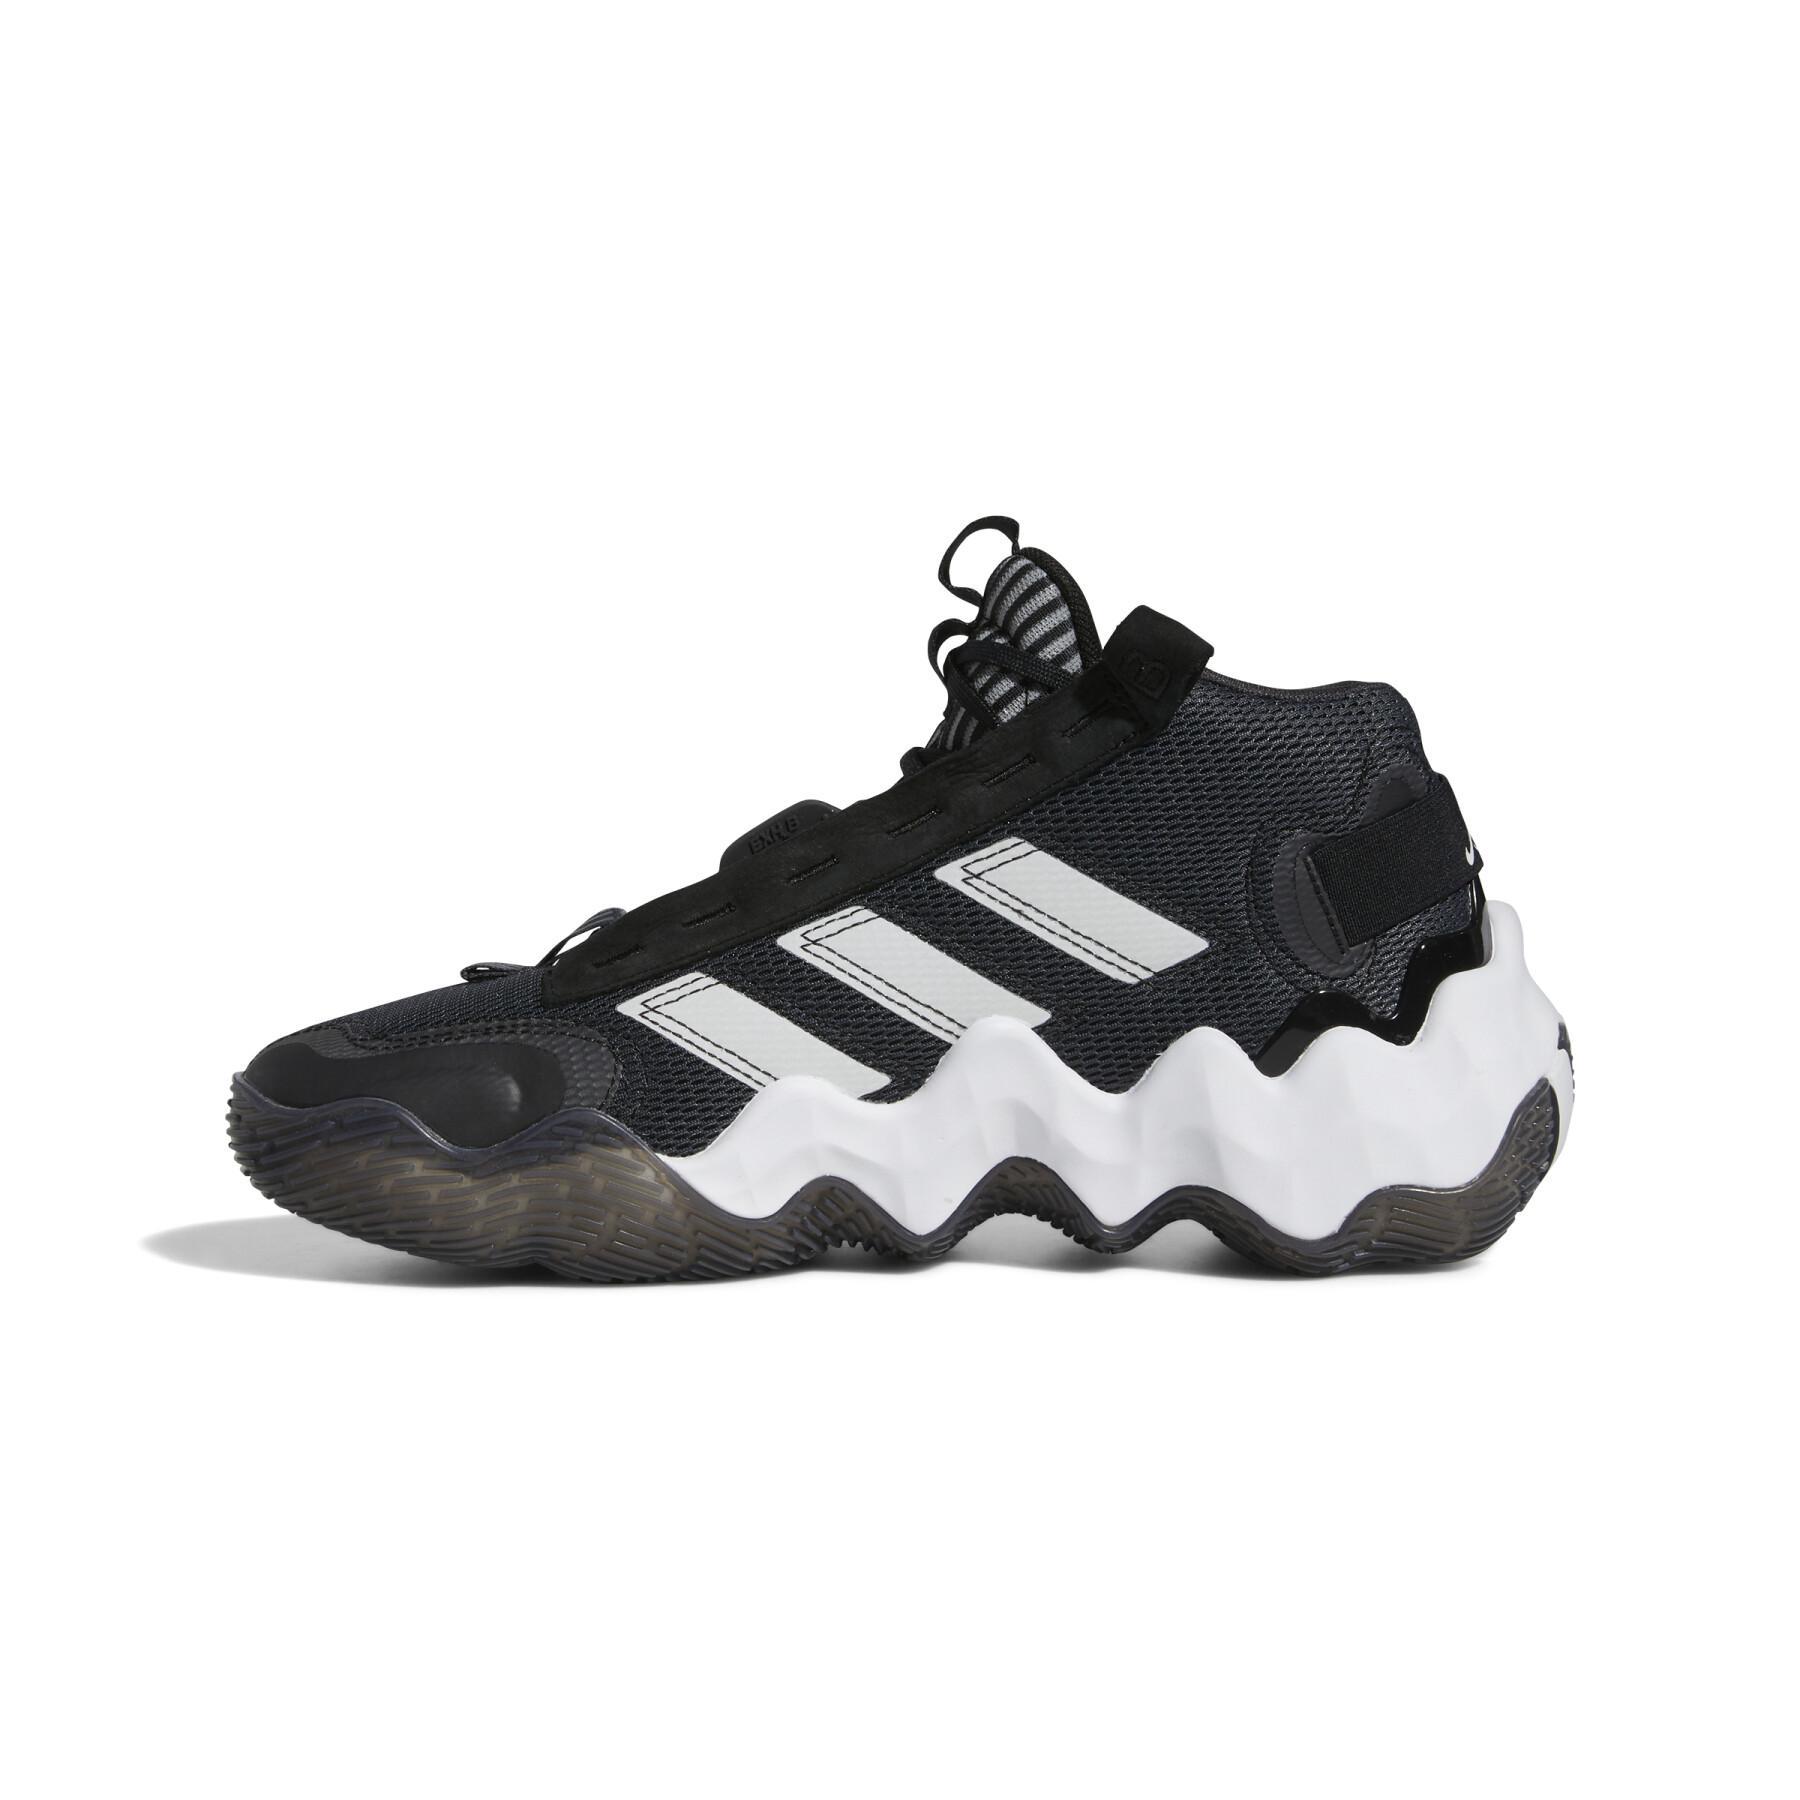 Indoor shoes for women adidas 130 Exhibit B Candace Parker